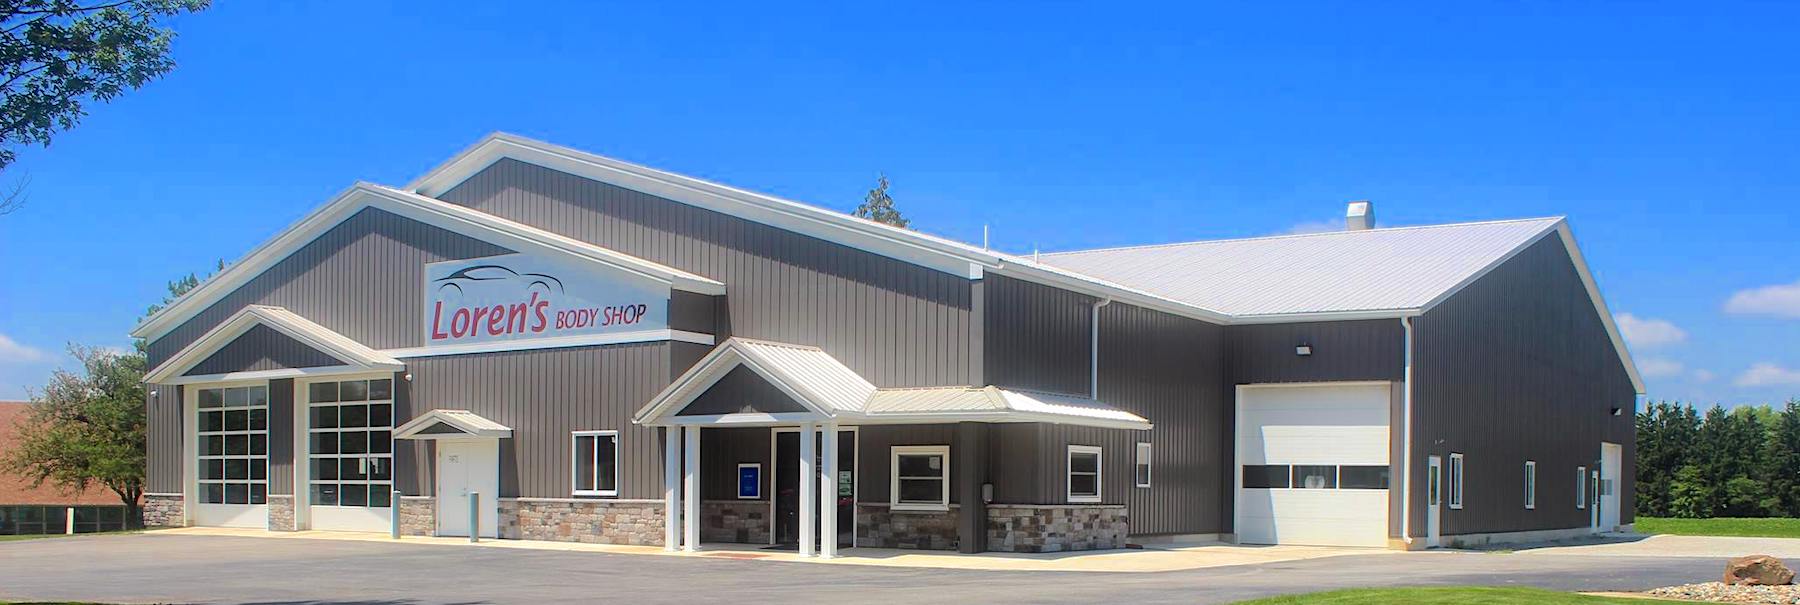 bluffton collision specialists building image